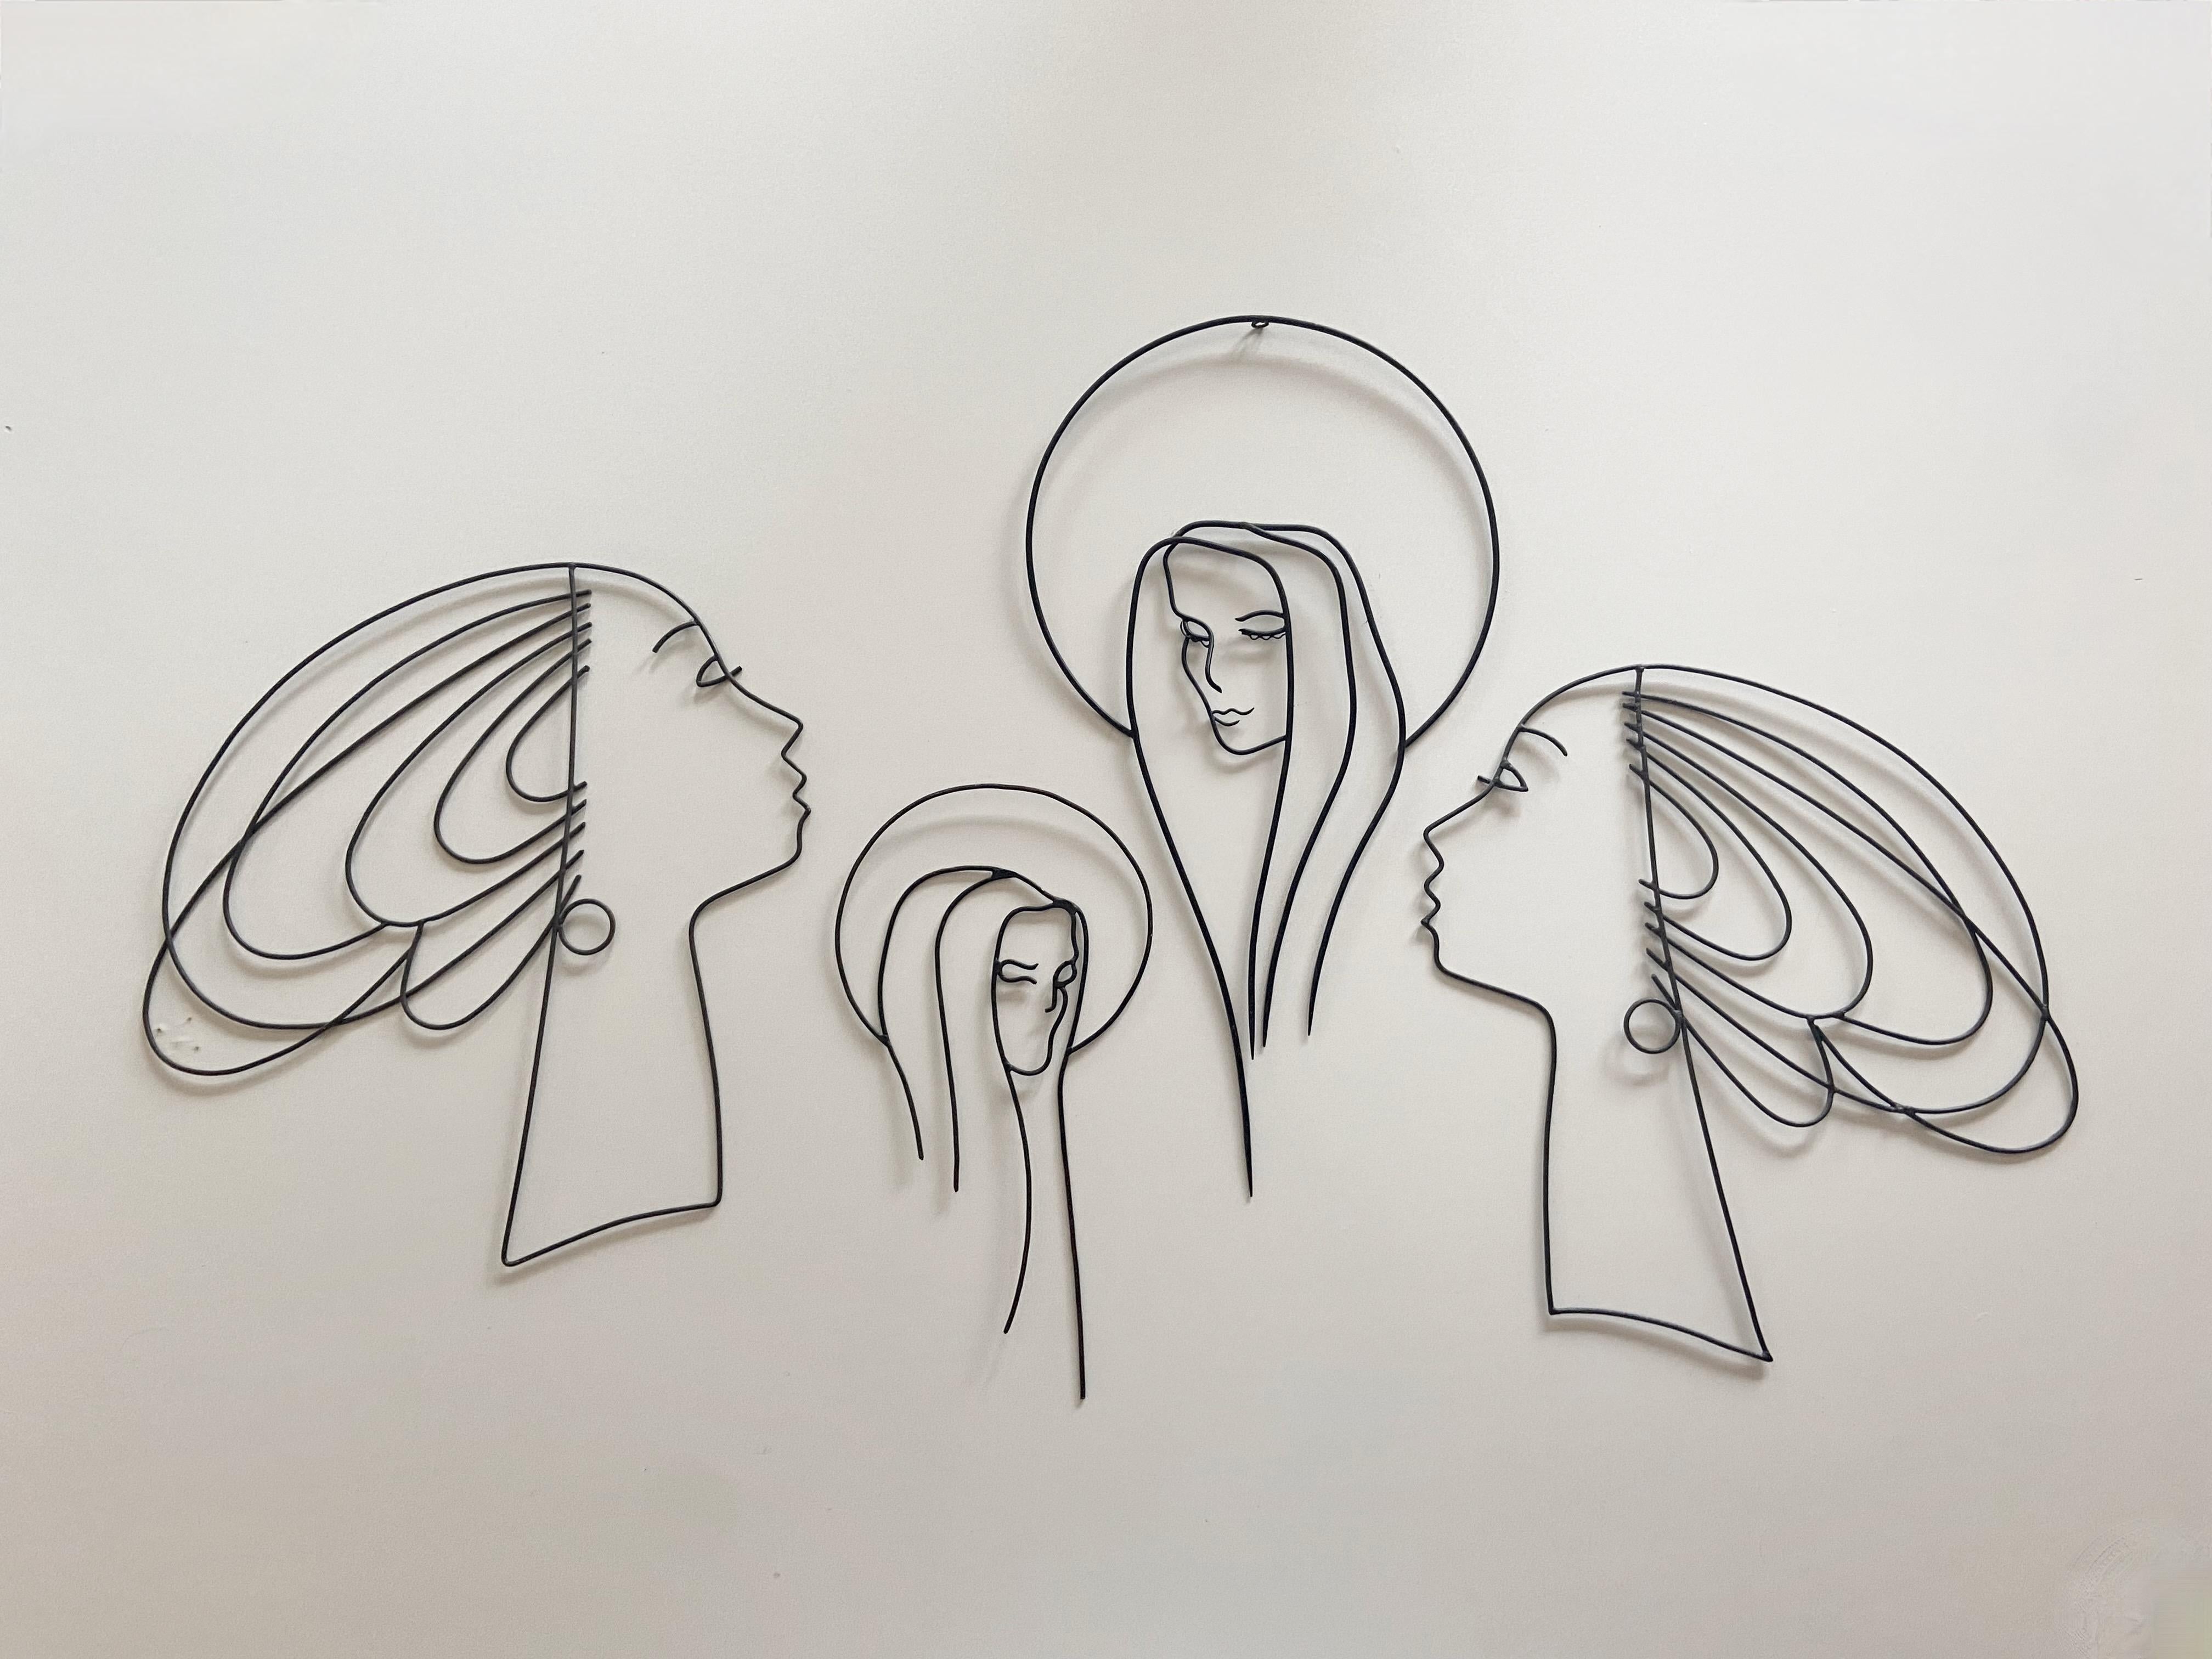 Mid-Century Modern Set of 4 Wire Wall Sculpture from the 1950s Silhouette Wire Figure Woman's Heads For Sale